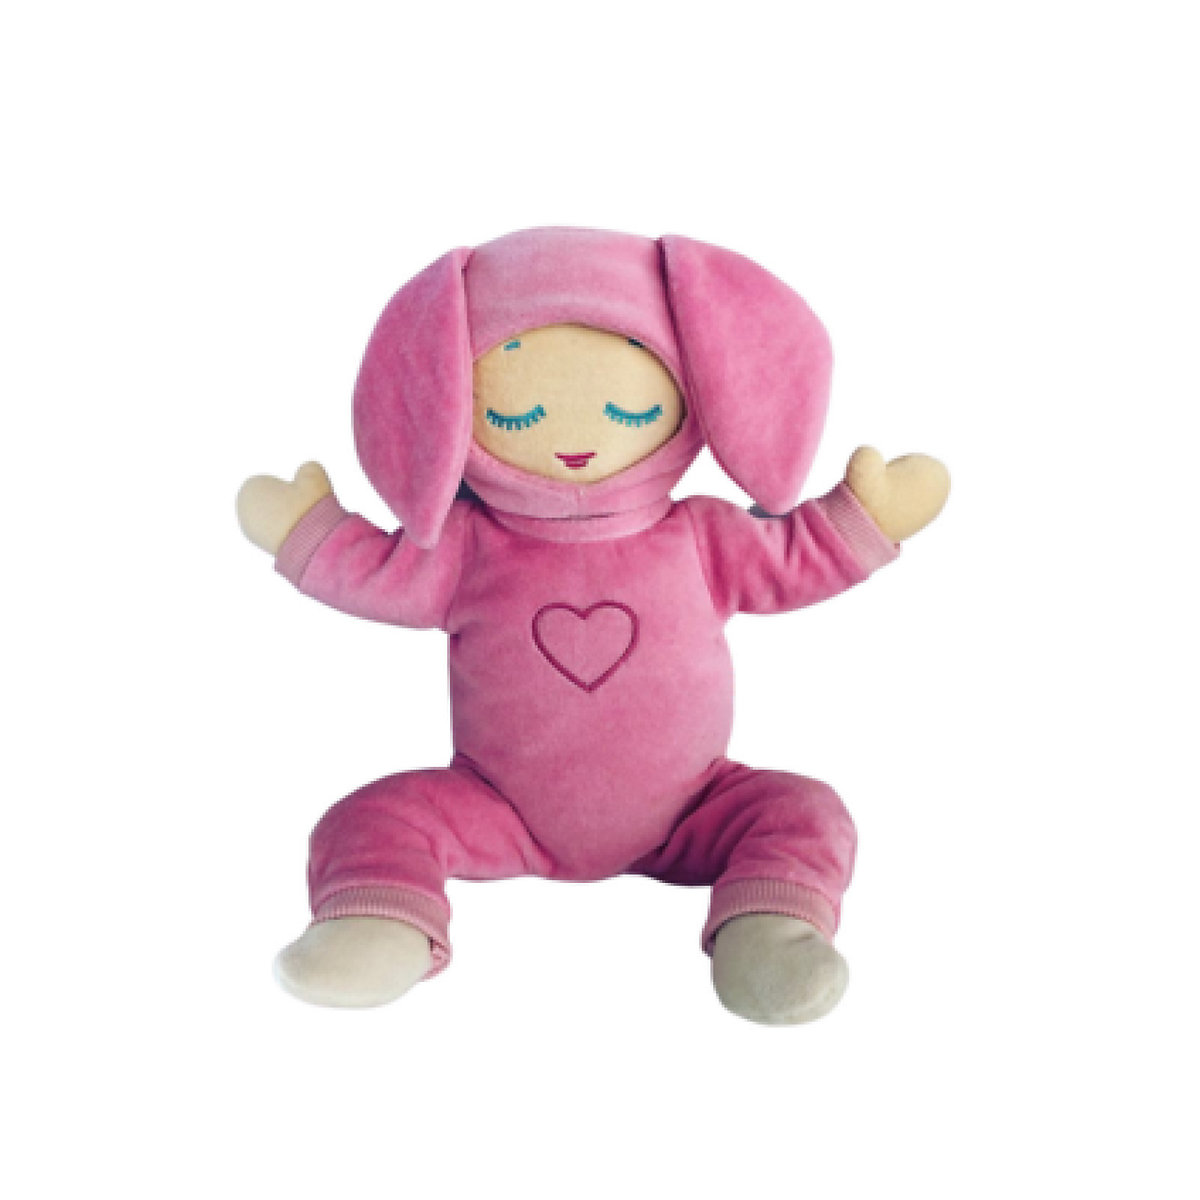 Lulla doll by RoRo Puppenkleidung Lulla Hase